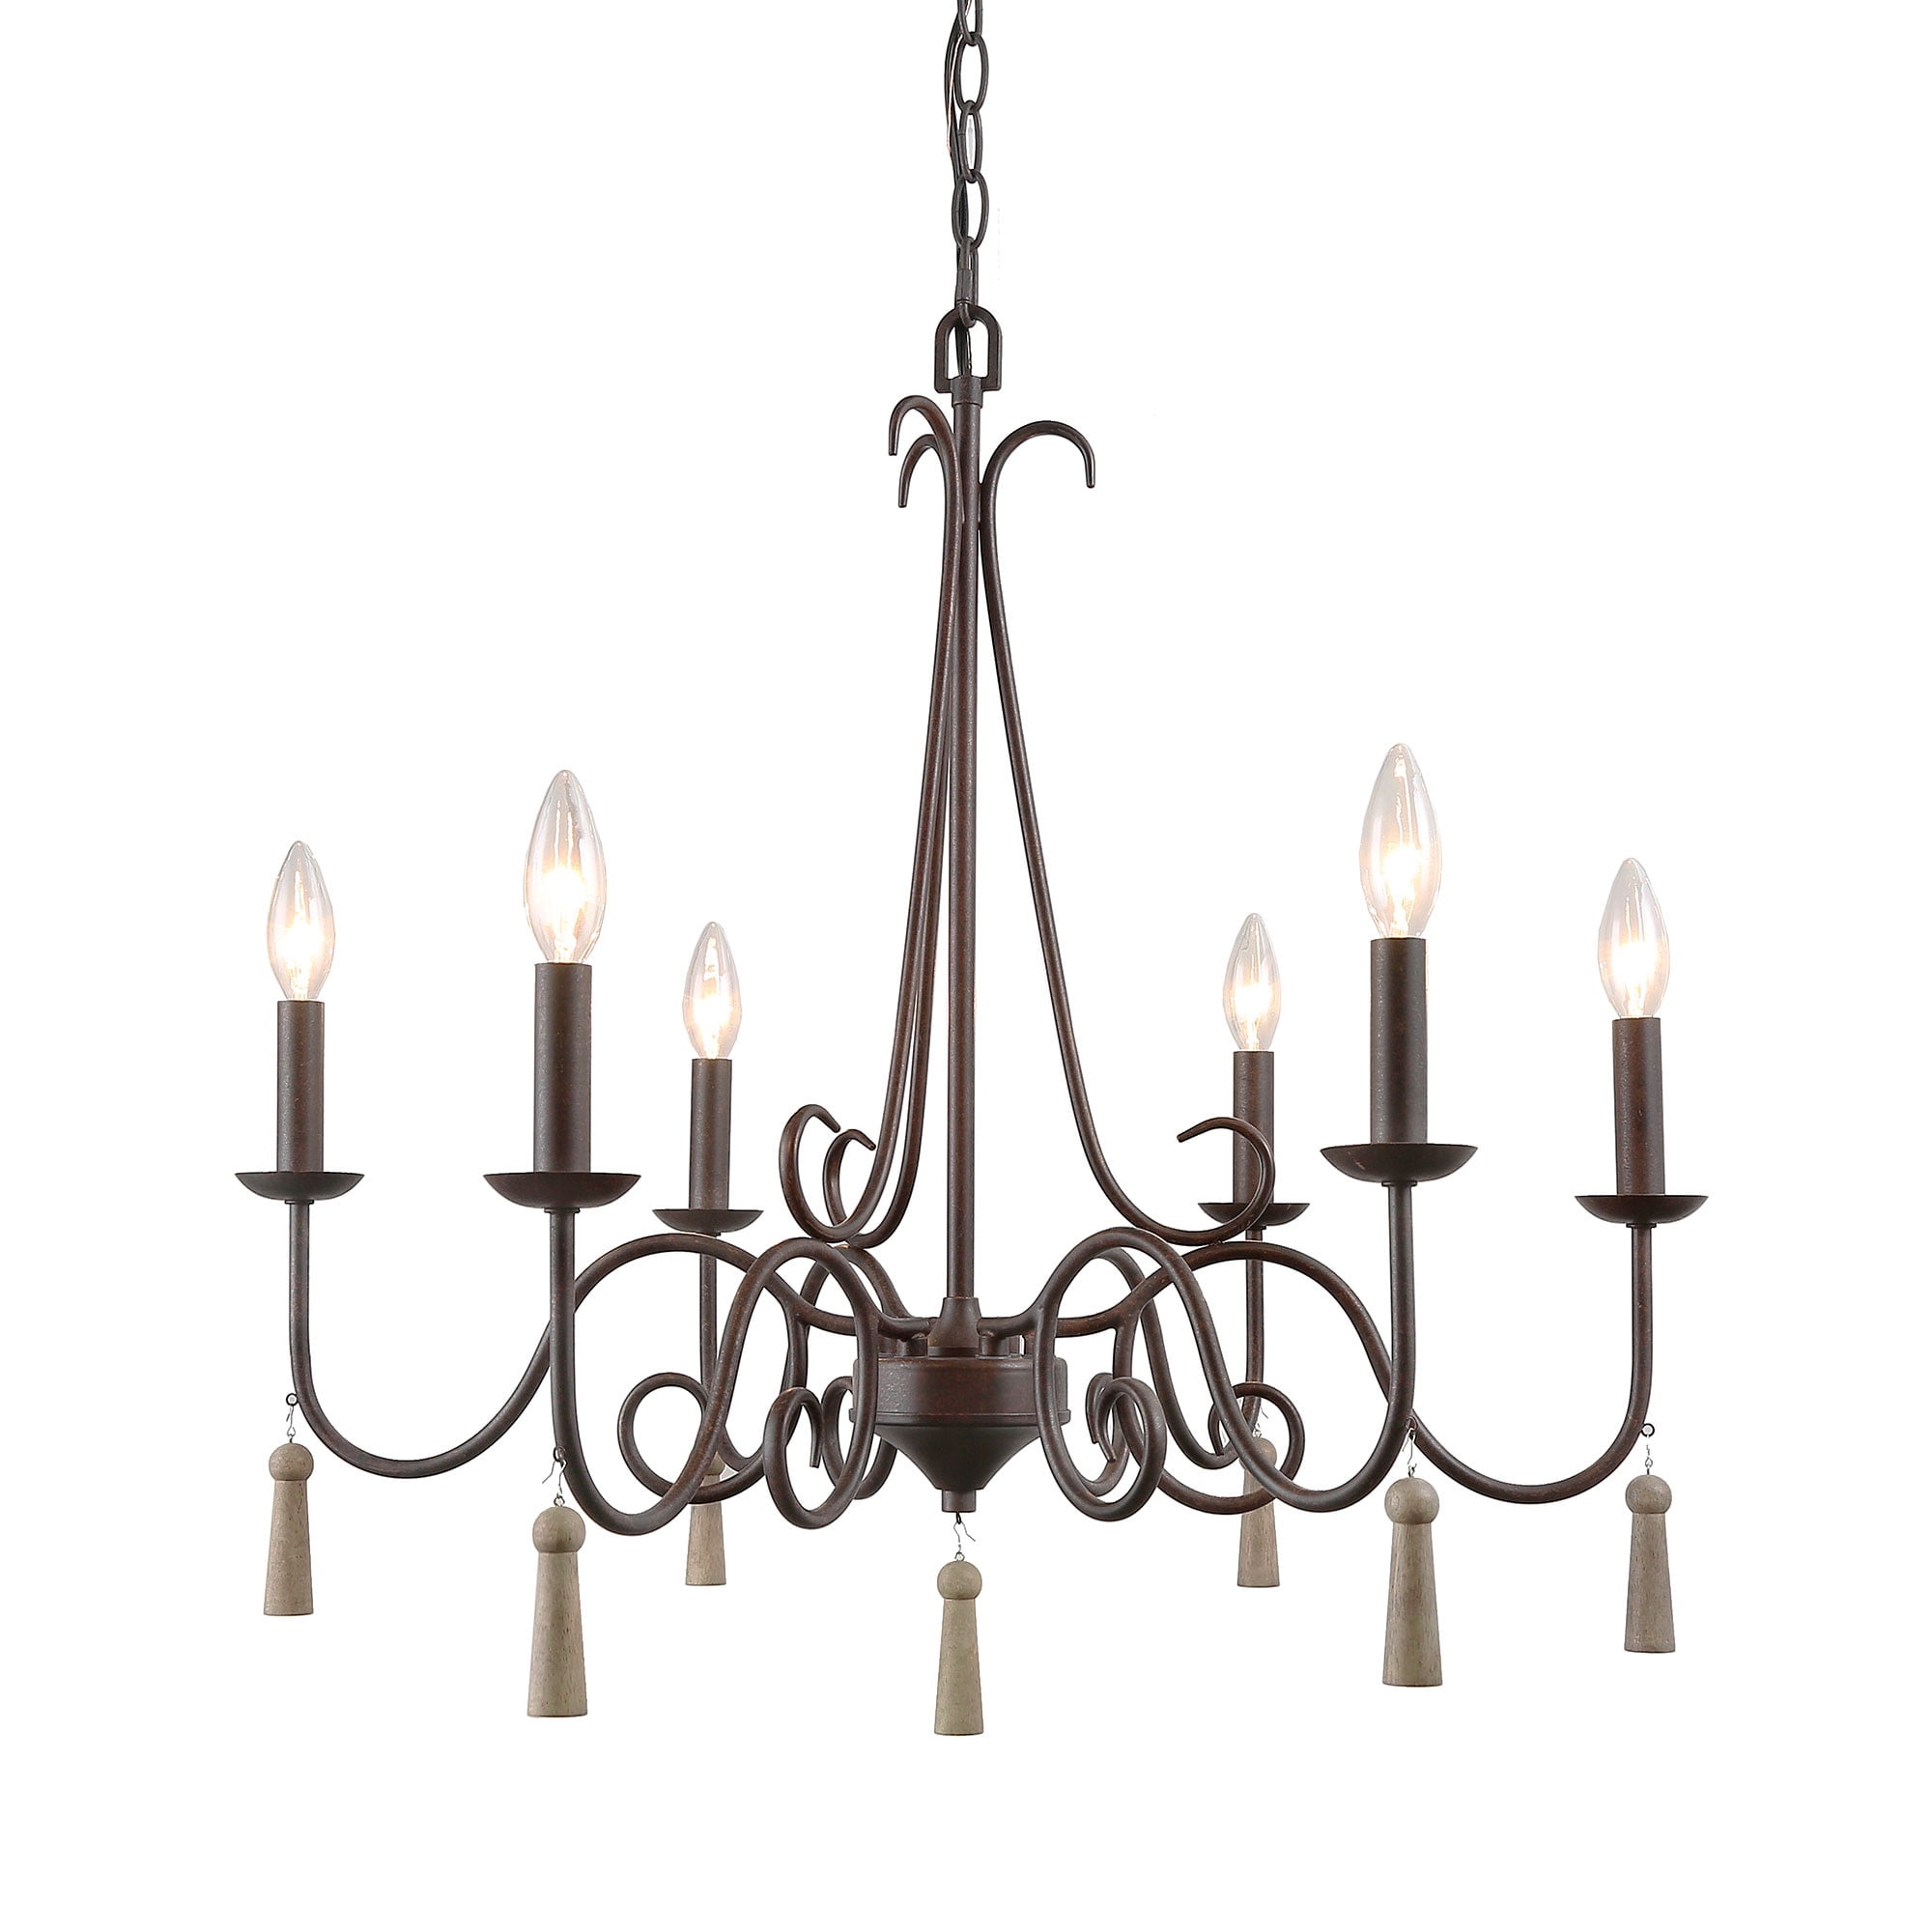 LNC Rustic French Country Chandelier, 6 Lights 26.4” Farmhouse ...